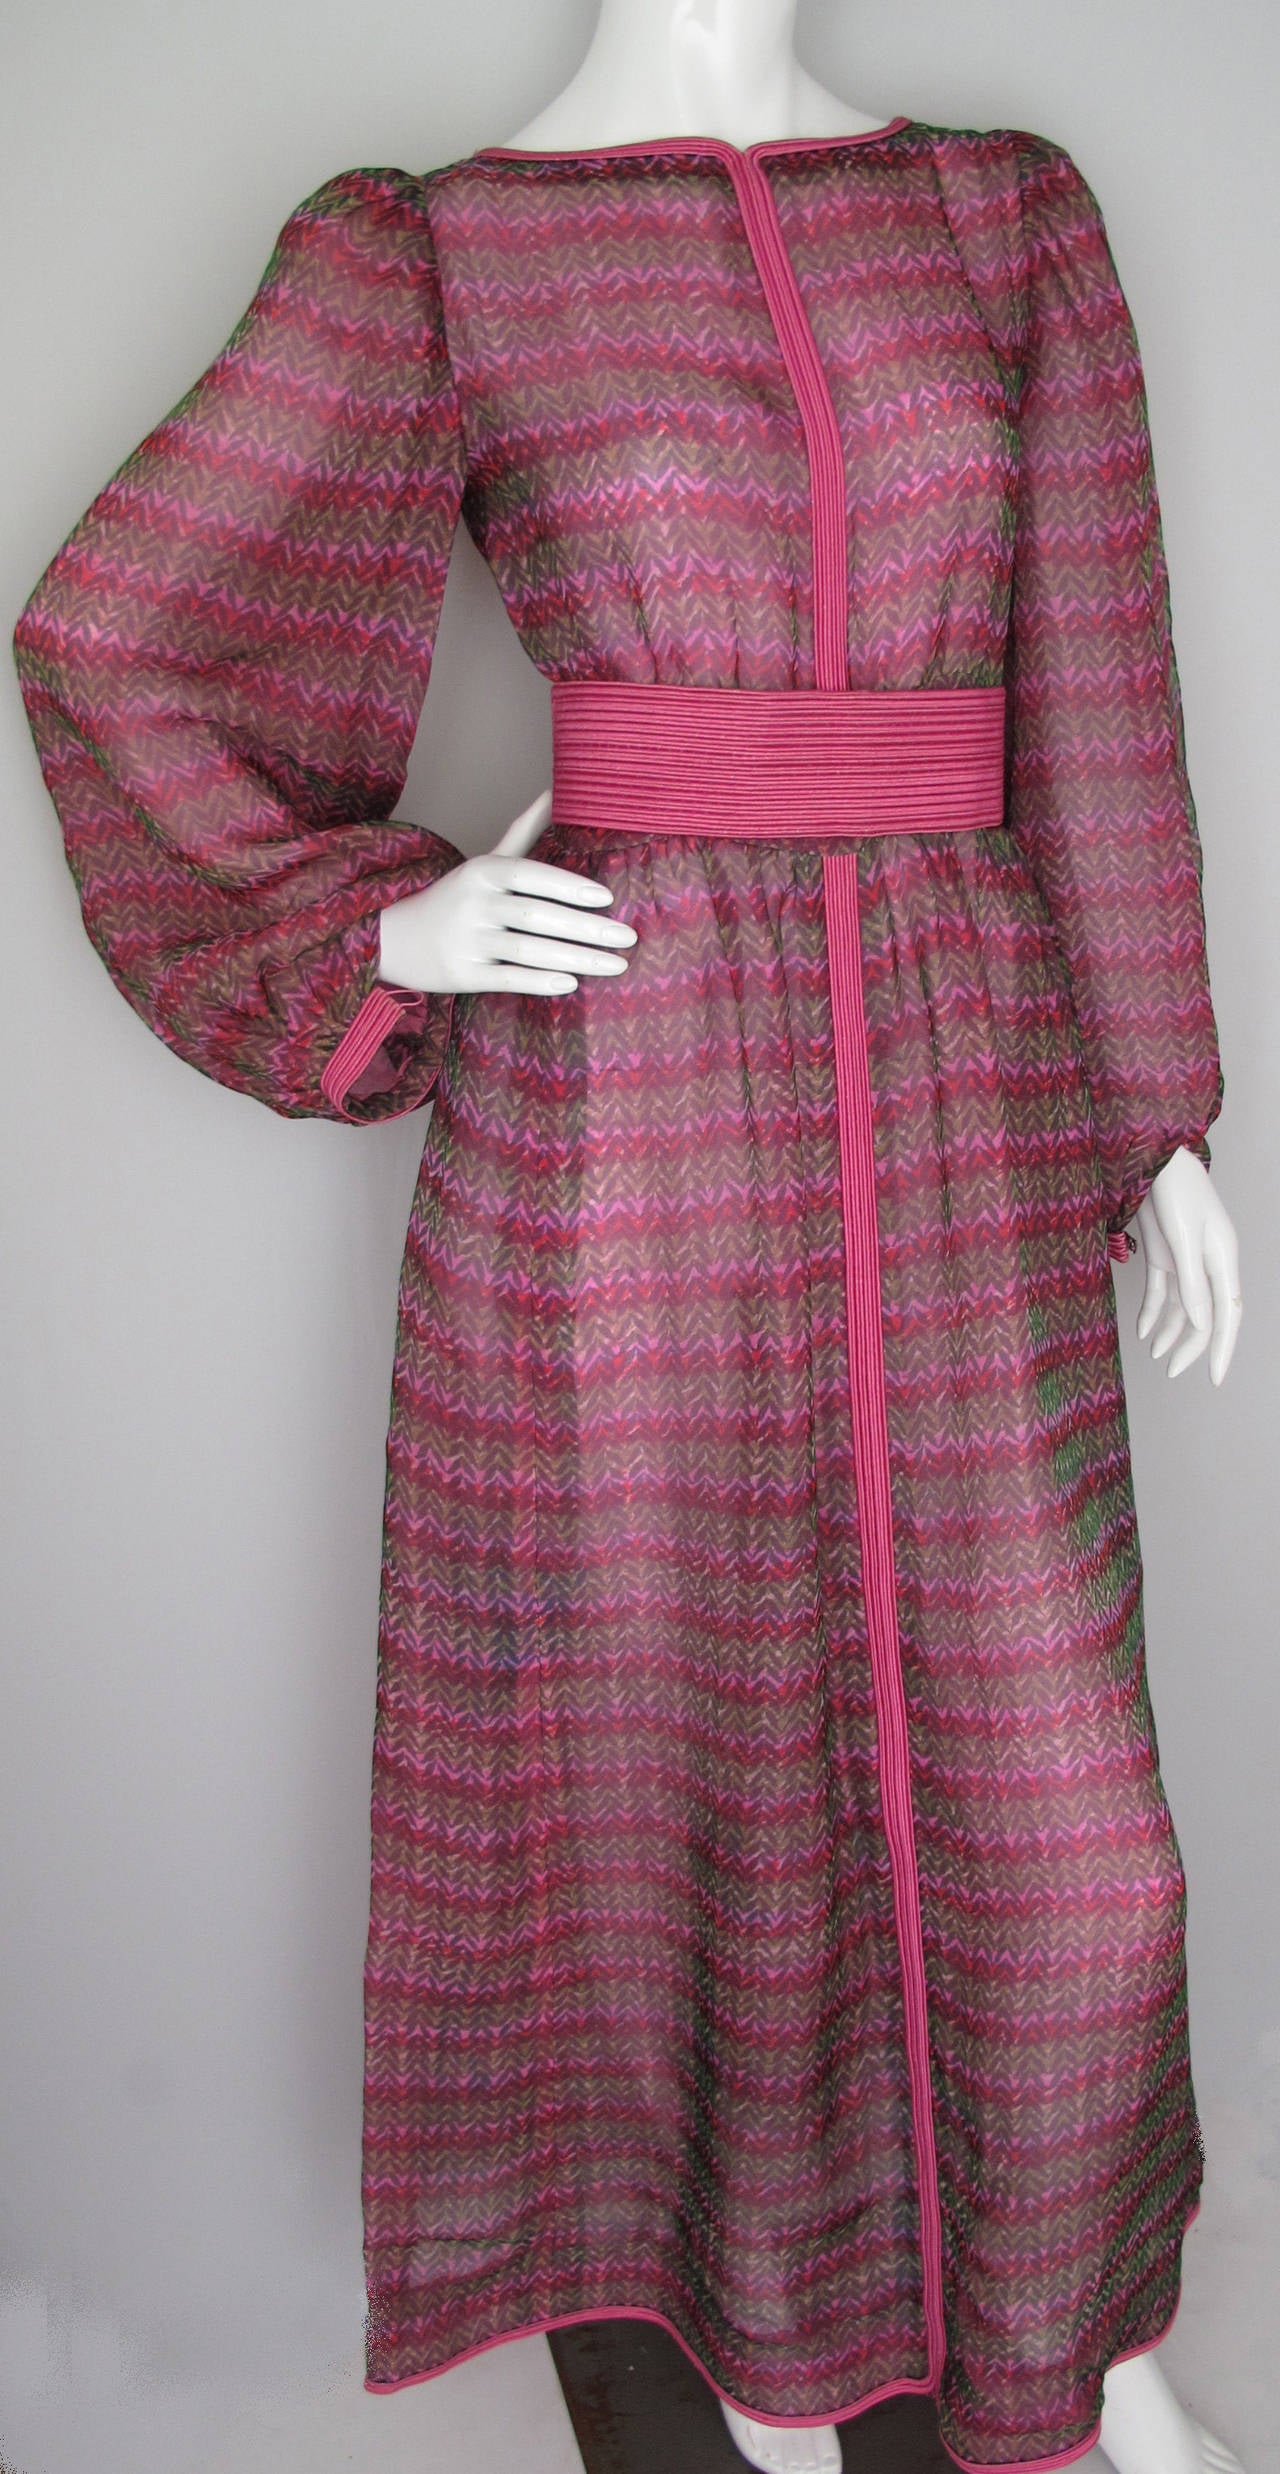 A 1970s Givenchy haute couture gown with full sleeves in shades of cranberry pink, mauve and green, with silk trim and two interchangeable belts. Since there is no fabric tag, my guess is the fabric is either a rayon or nylon organza and the lining